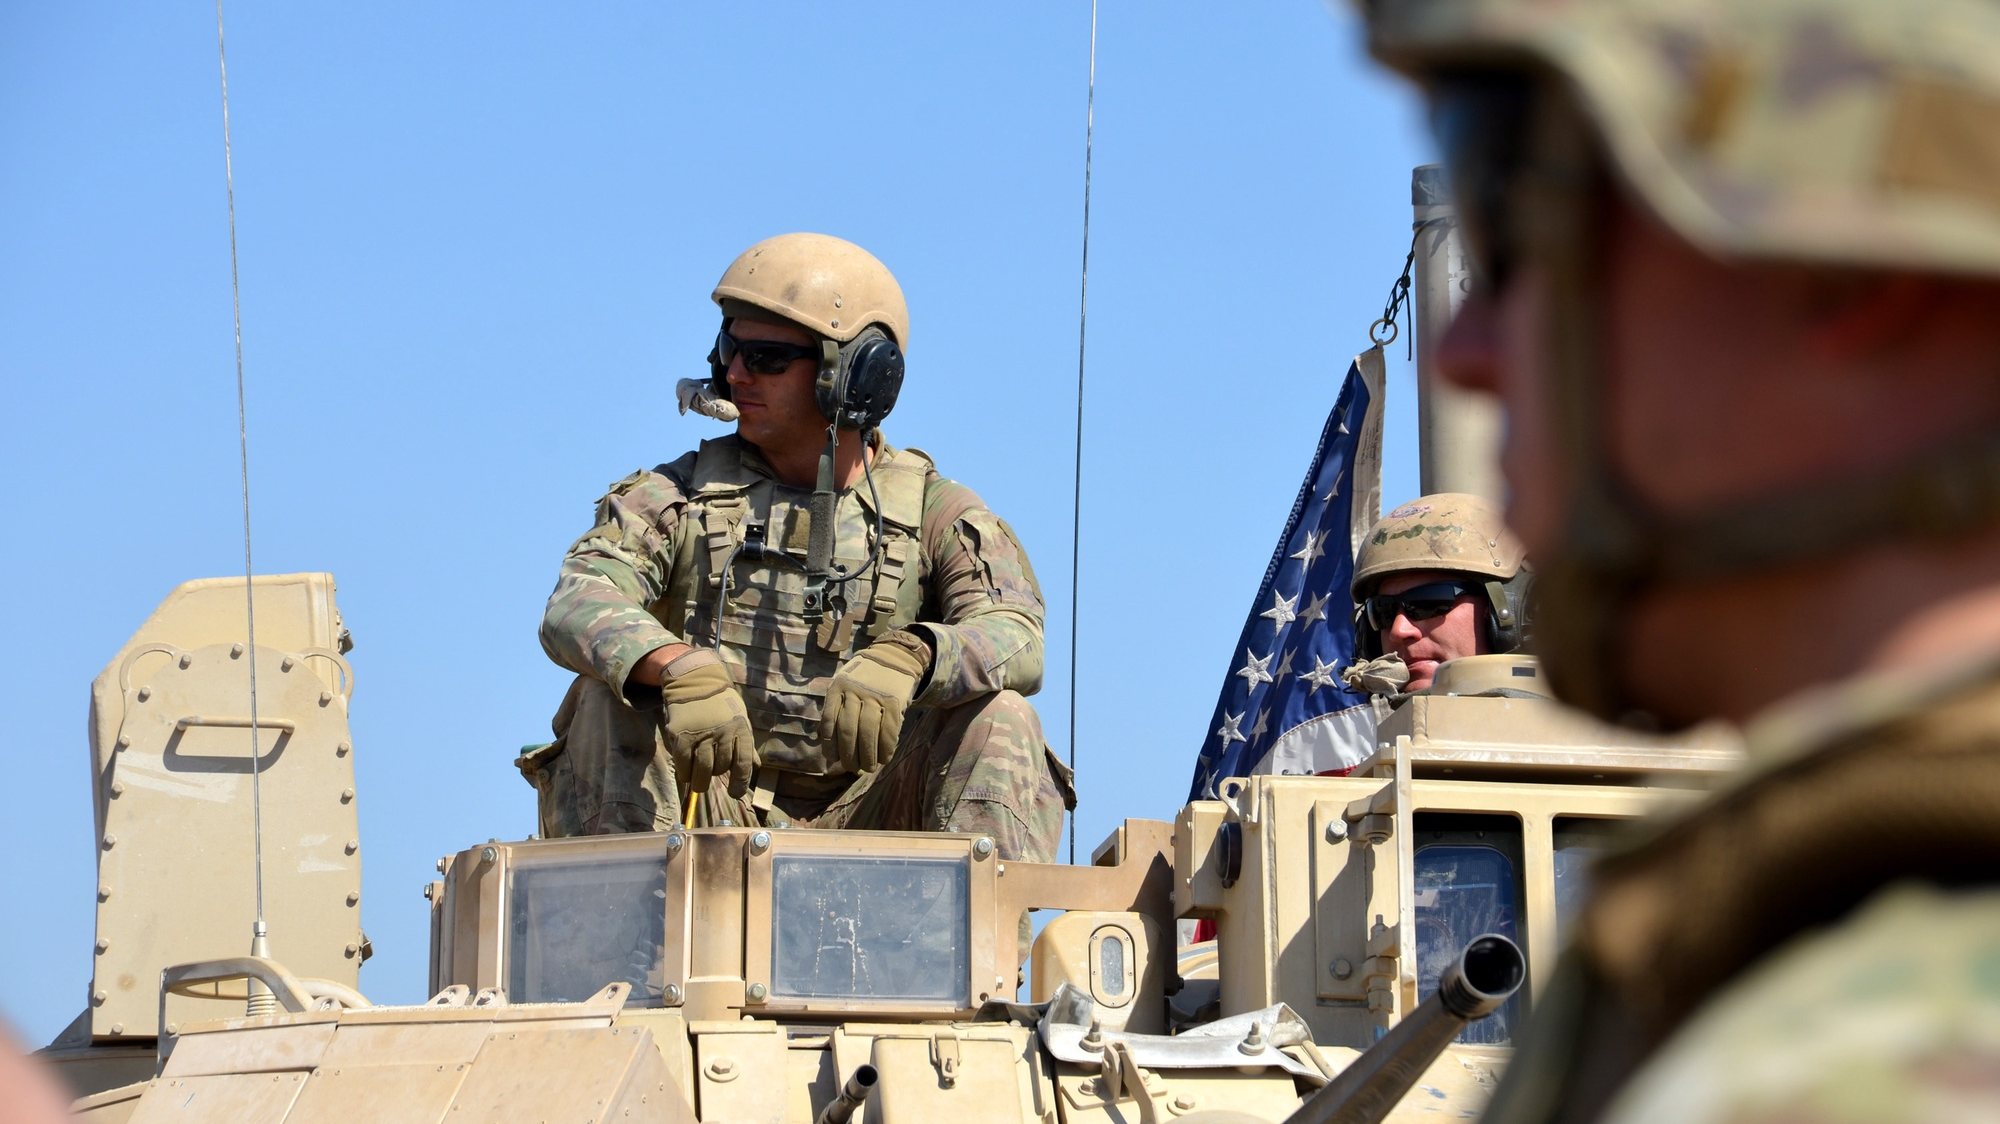 epa10167543 US soldiers take part in Military exercises with Syria democratic forces (SDF) at Dayrik town close to the tri-border between Syria, Iraq, and Turkey in al-Hasakah governorate, northeastern Syria, 07 September 2022. The US-led coalition carried out the first joint military exercise with the Syrian Democratic Forces (SDF) in the border village of Taqil Baqil in Derik district near the tri-border between Syria, Iraq, and Turkey. The SDF said that the maneuver aims to raise the readiness of the SDF and make it ready to repel possible attacks that launched by ISIS cells in the region.  EPA/AHMED MARDNLI